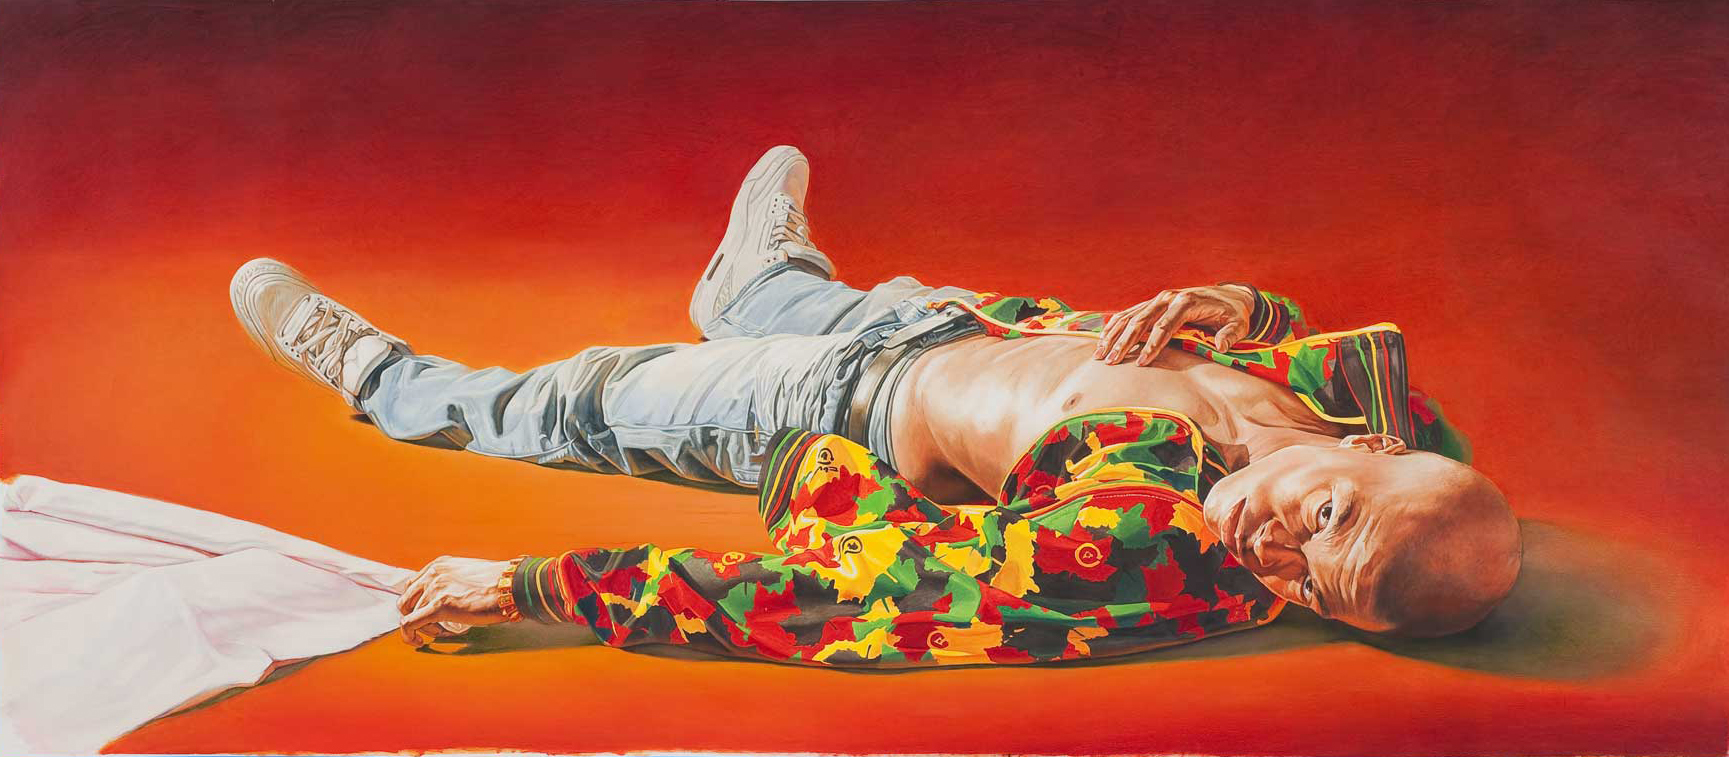 Kehinde Wiley | Selected Works: 2009 | Matador, 2009 Oil on Paper. | 6